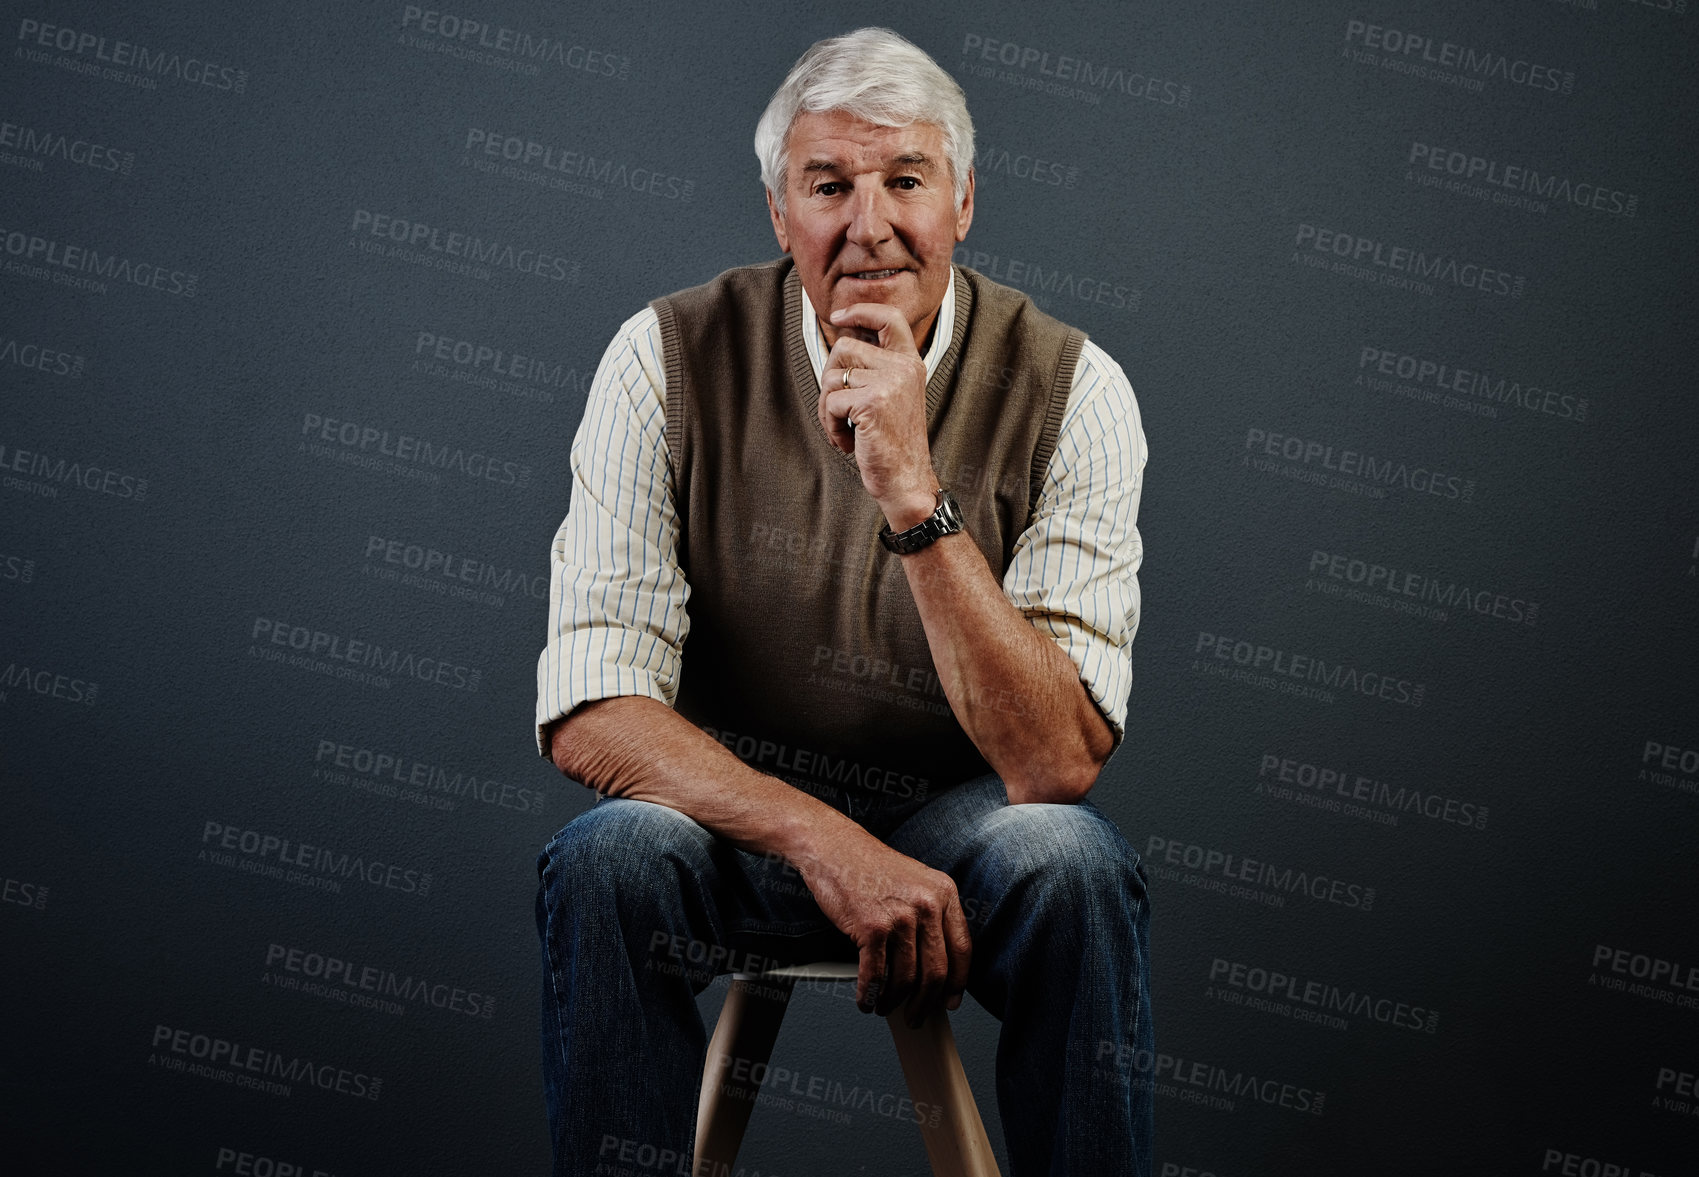 Buy stock photo Studio portrait of a handsome mature man looking thoughtful while sitting on a stool against a dark background